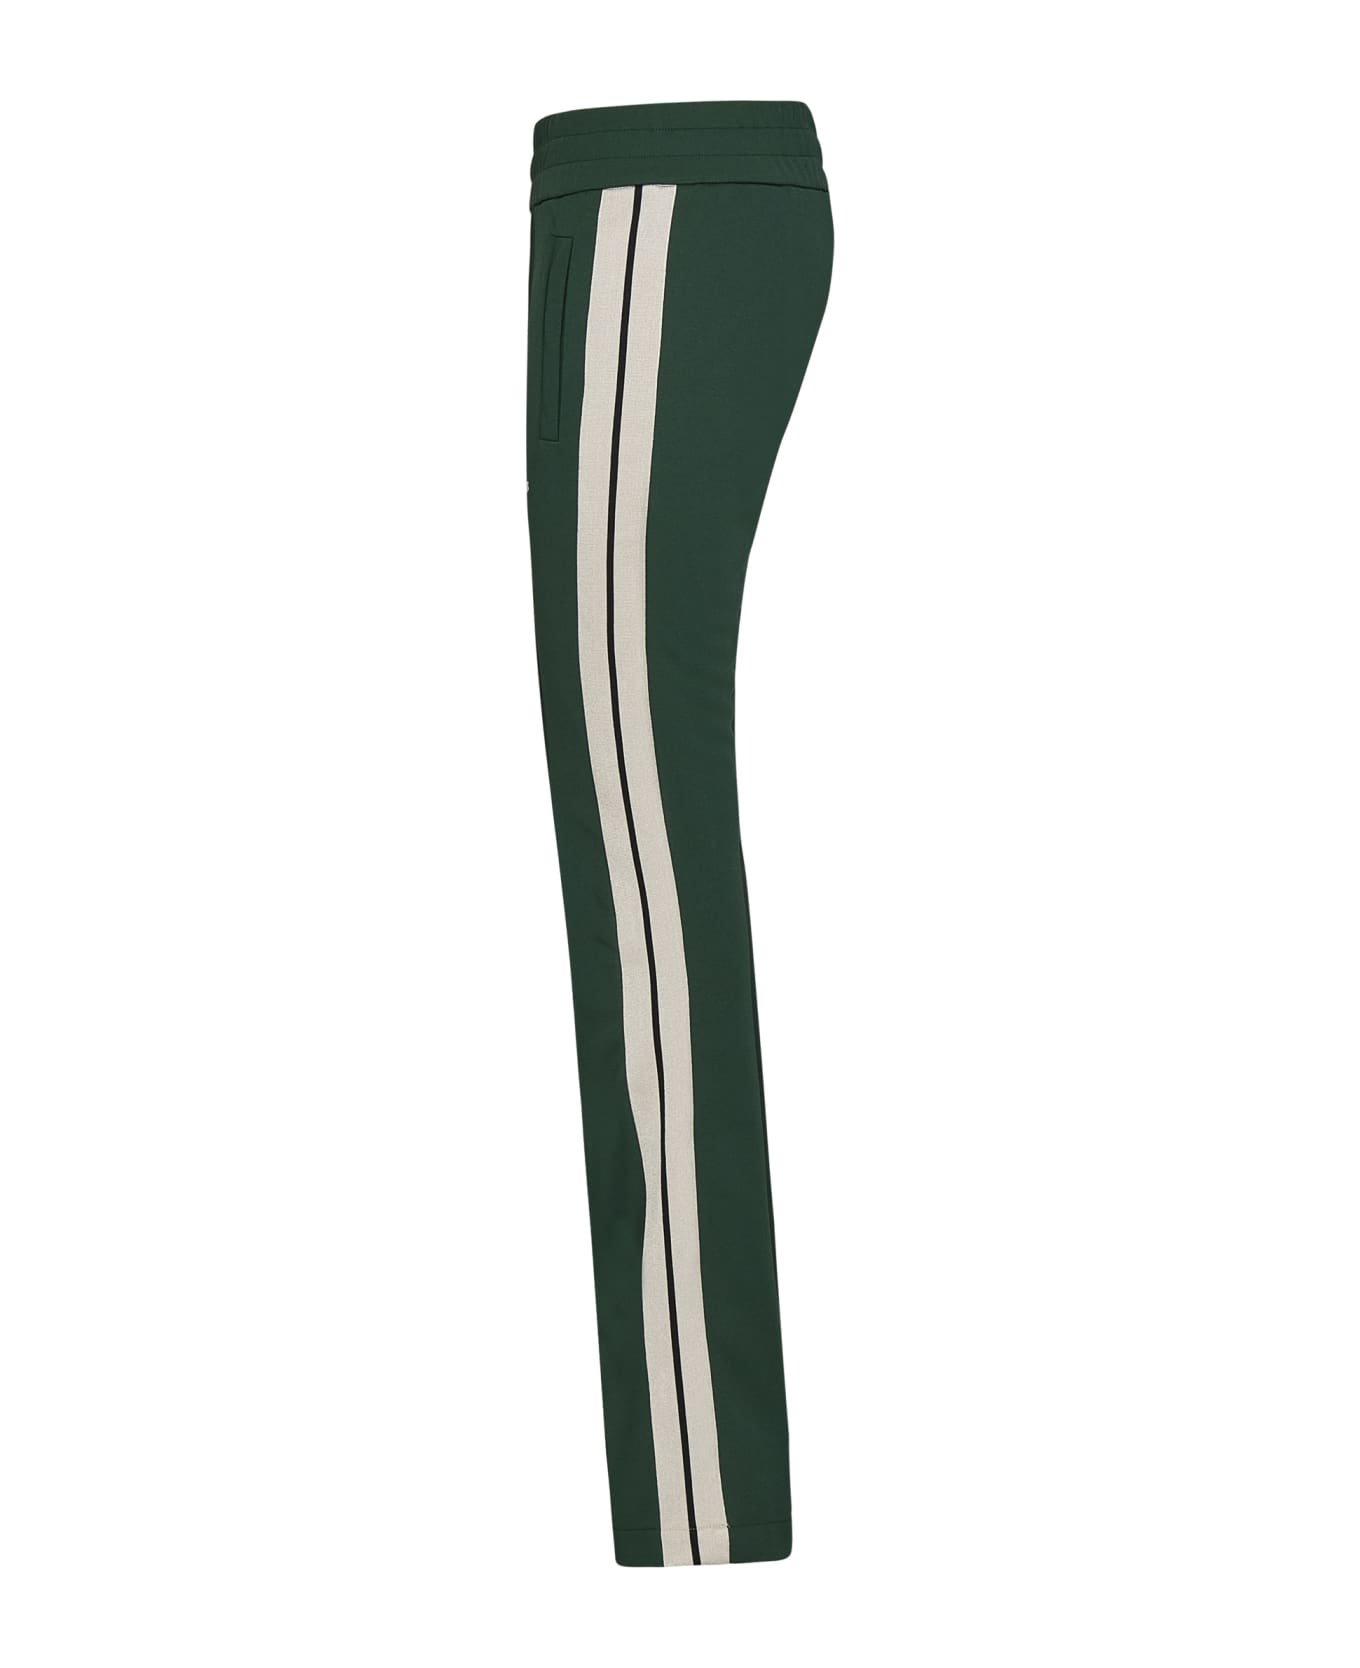 Palm Angels Flare Track Trousers - Green